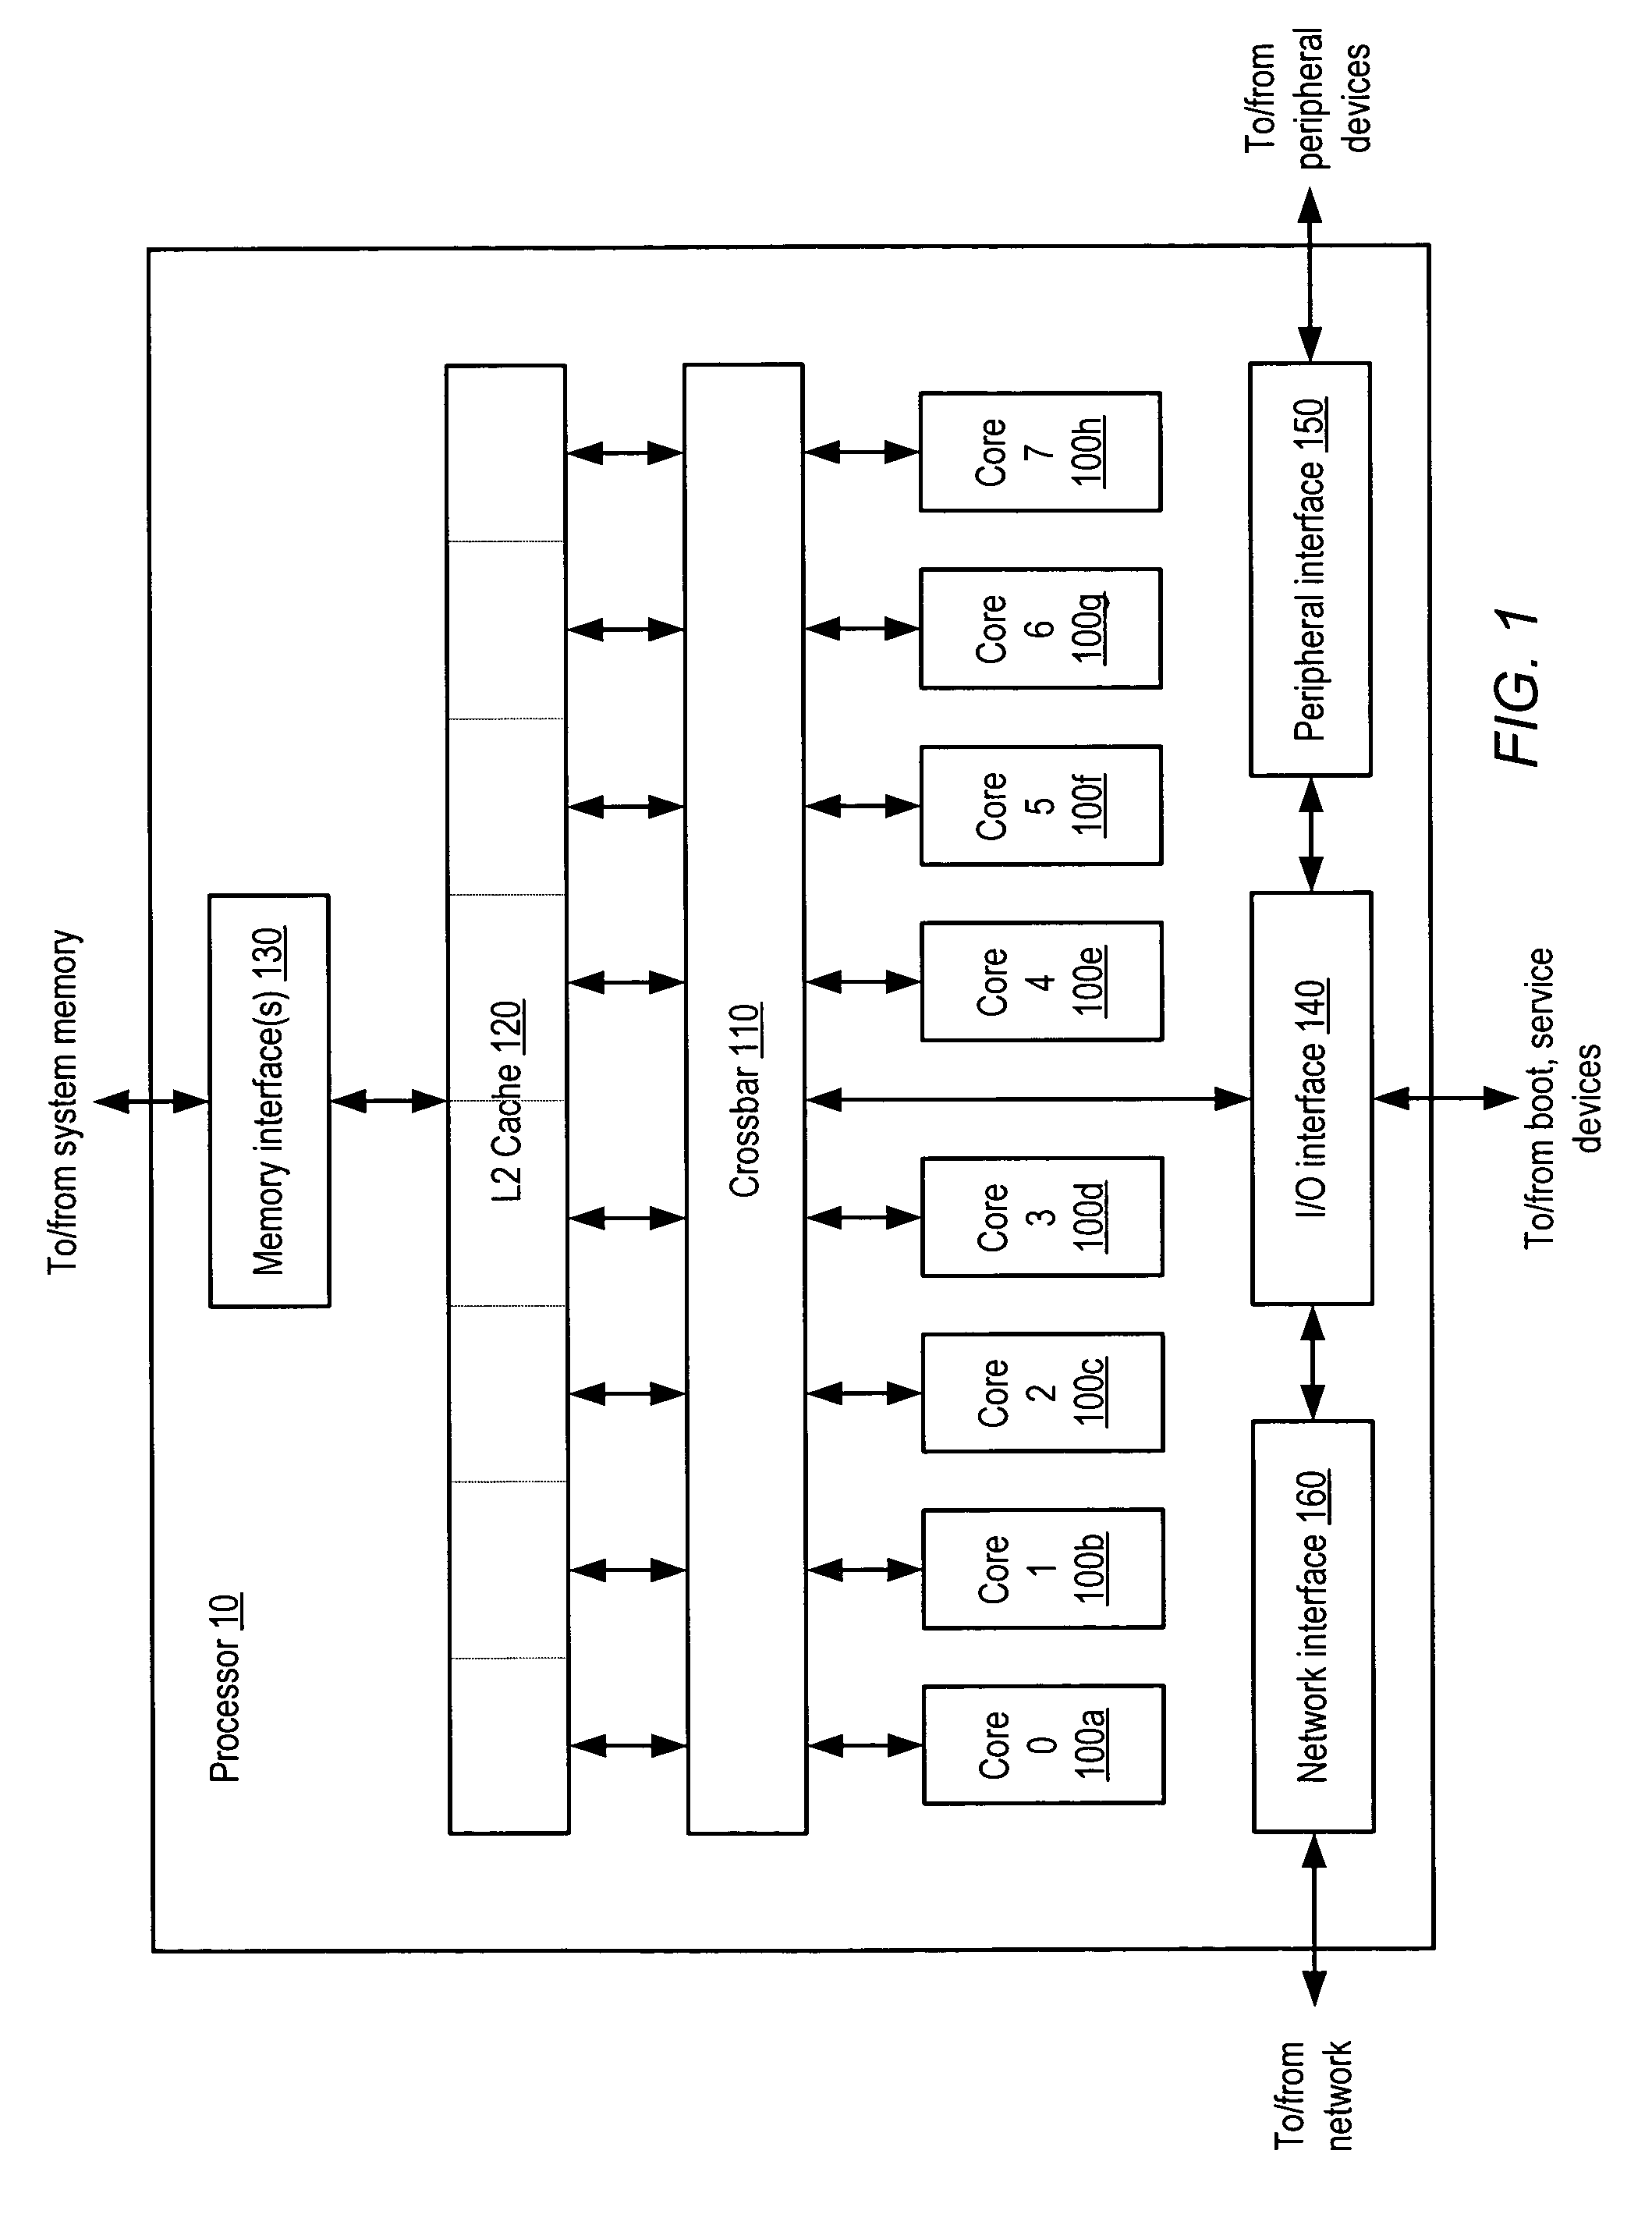 Apparatus and method to support pipelining of differing-latency instructions in a multithreaded processor